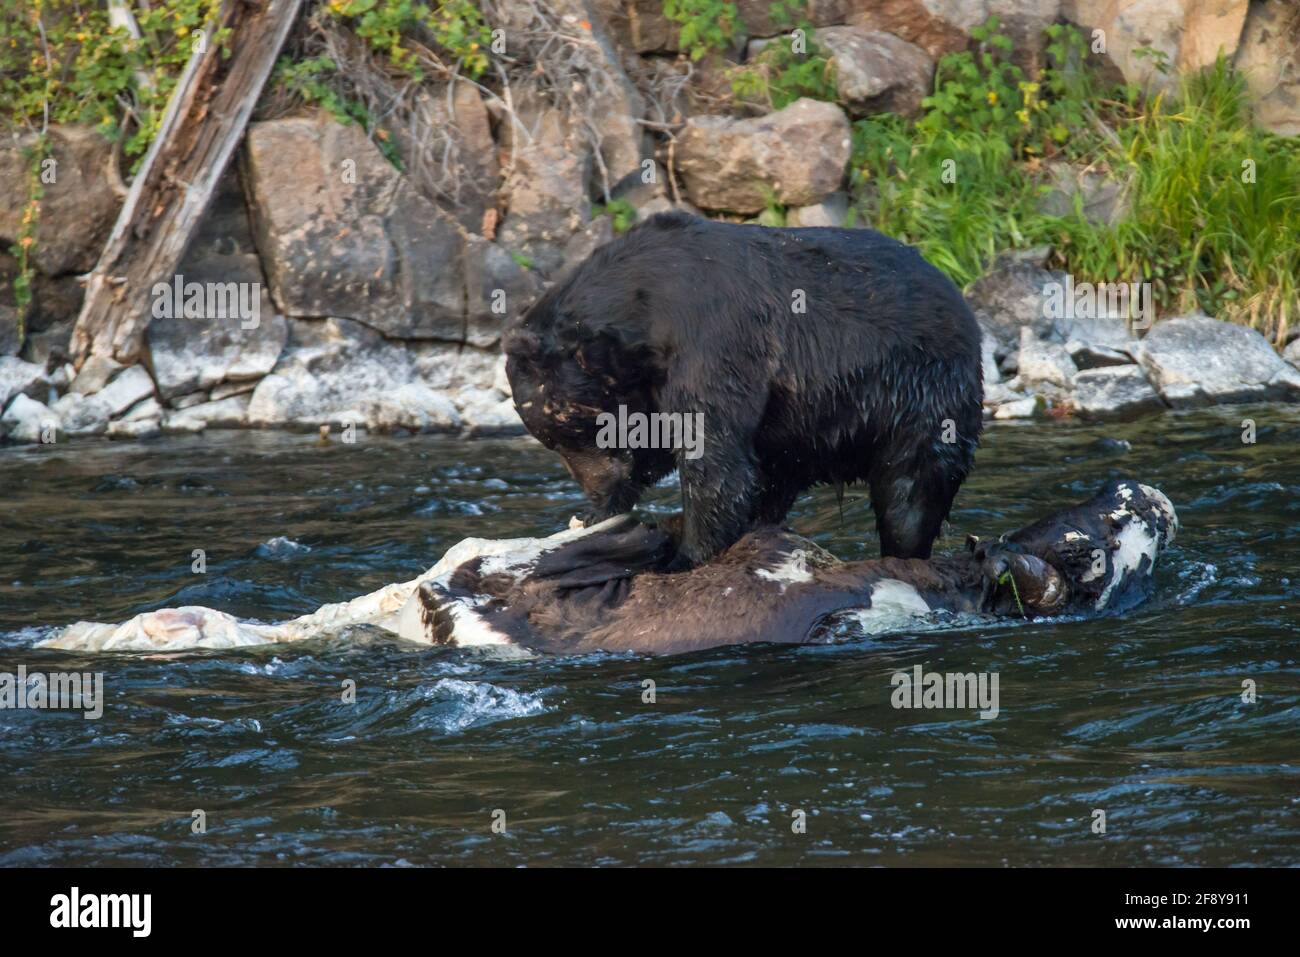 A wet black grizzly bear on top of an American Bison / buffalo carcass in the Yellowstone River in Yellowstone National Park, USA Stock Photo